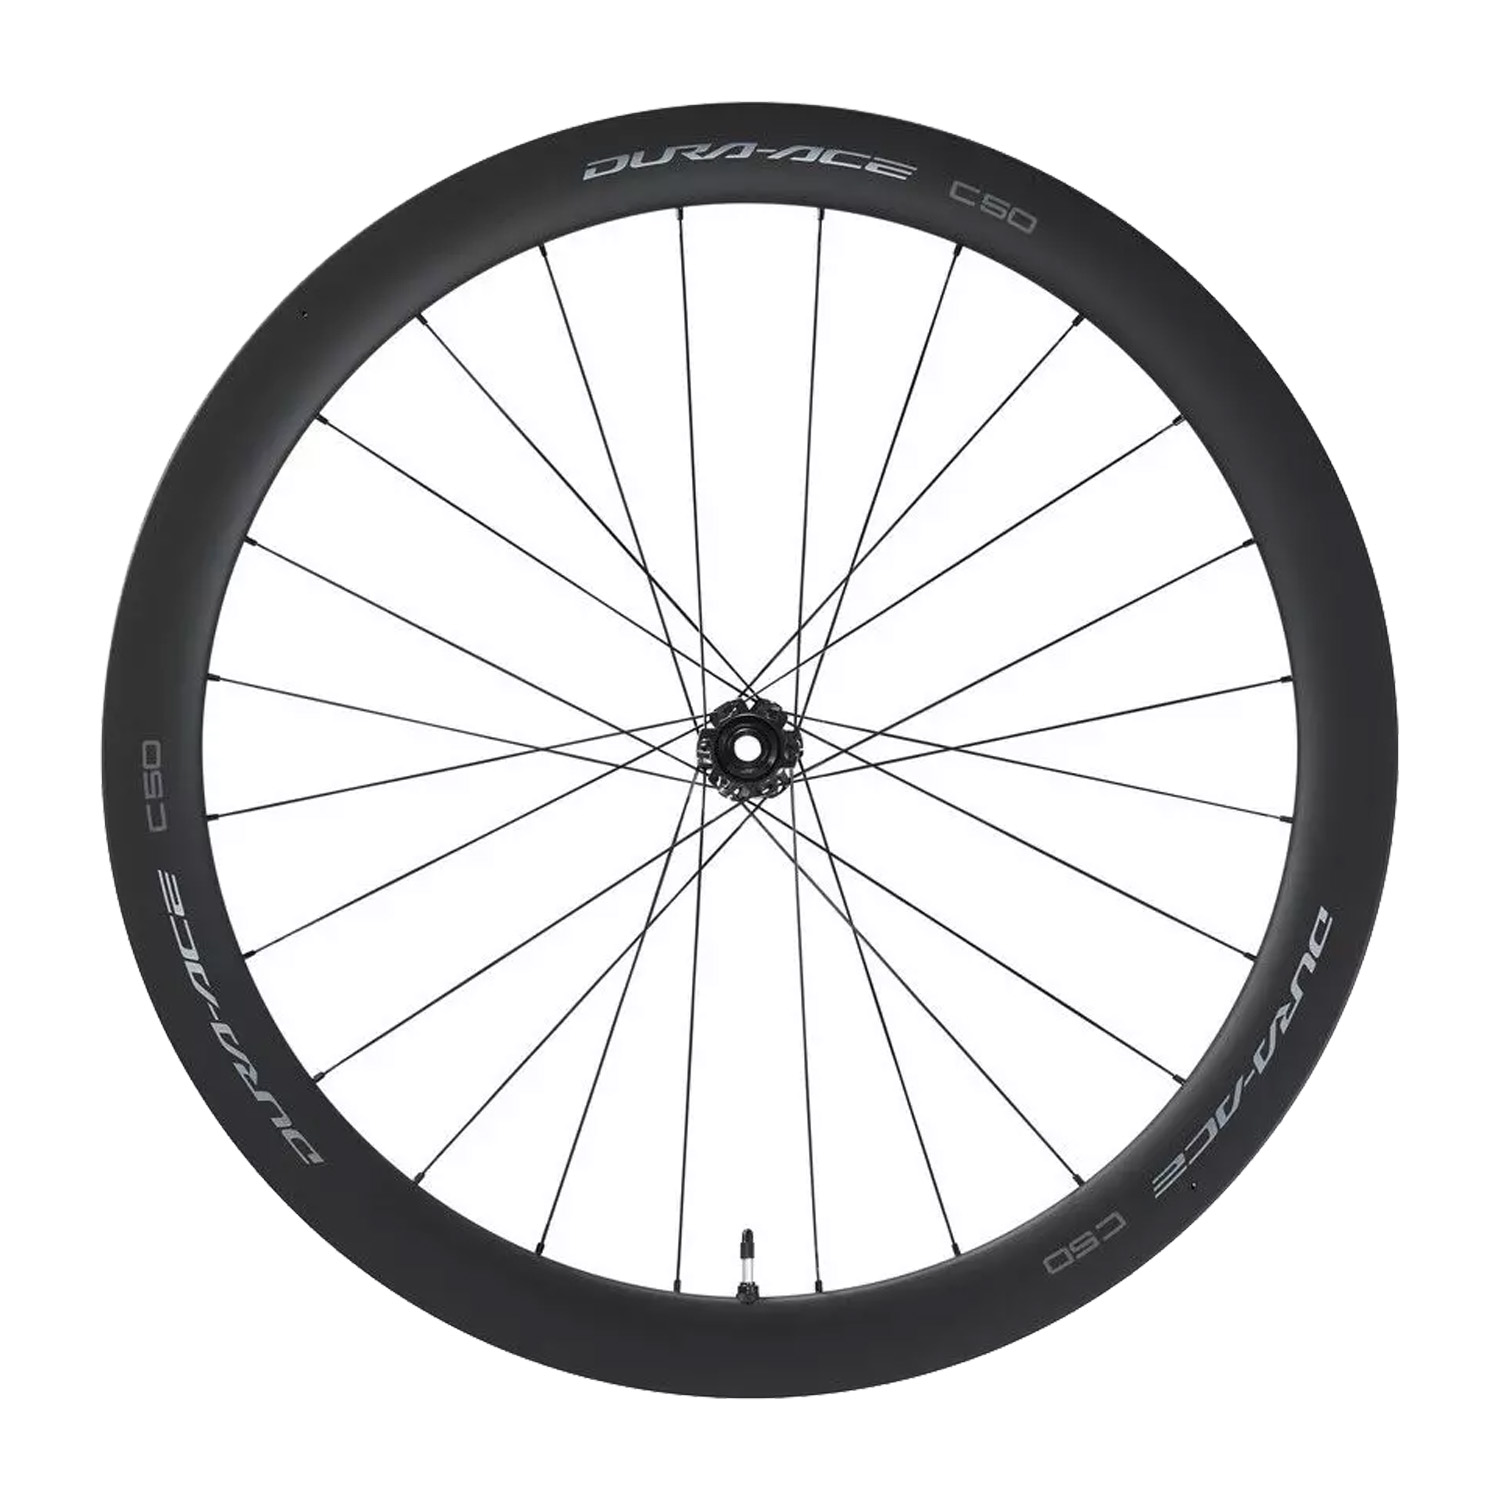 Shimano Dura-Ace WH-R9270 C50 TL disc